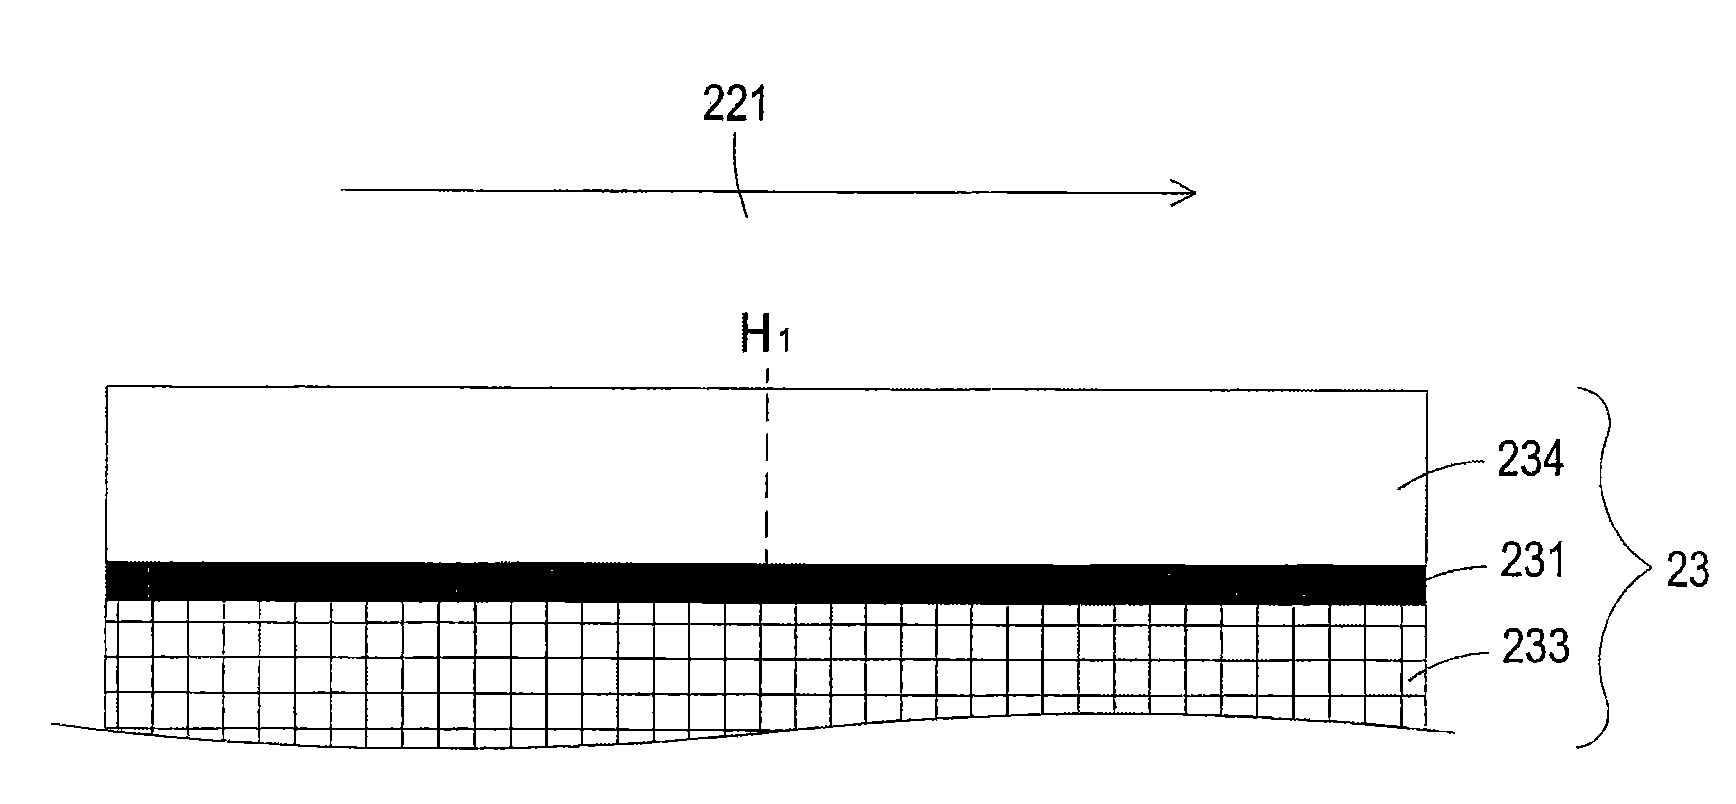 Proton exchange model fuel cell unit, membrane electrode group and gaseous diffusion layer structure